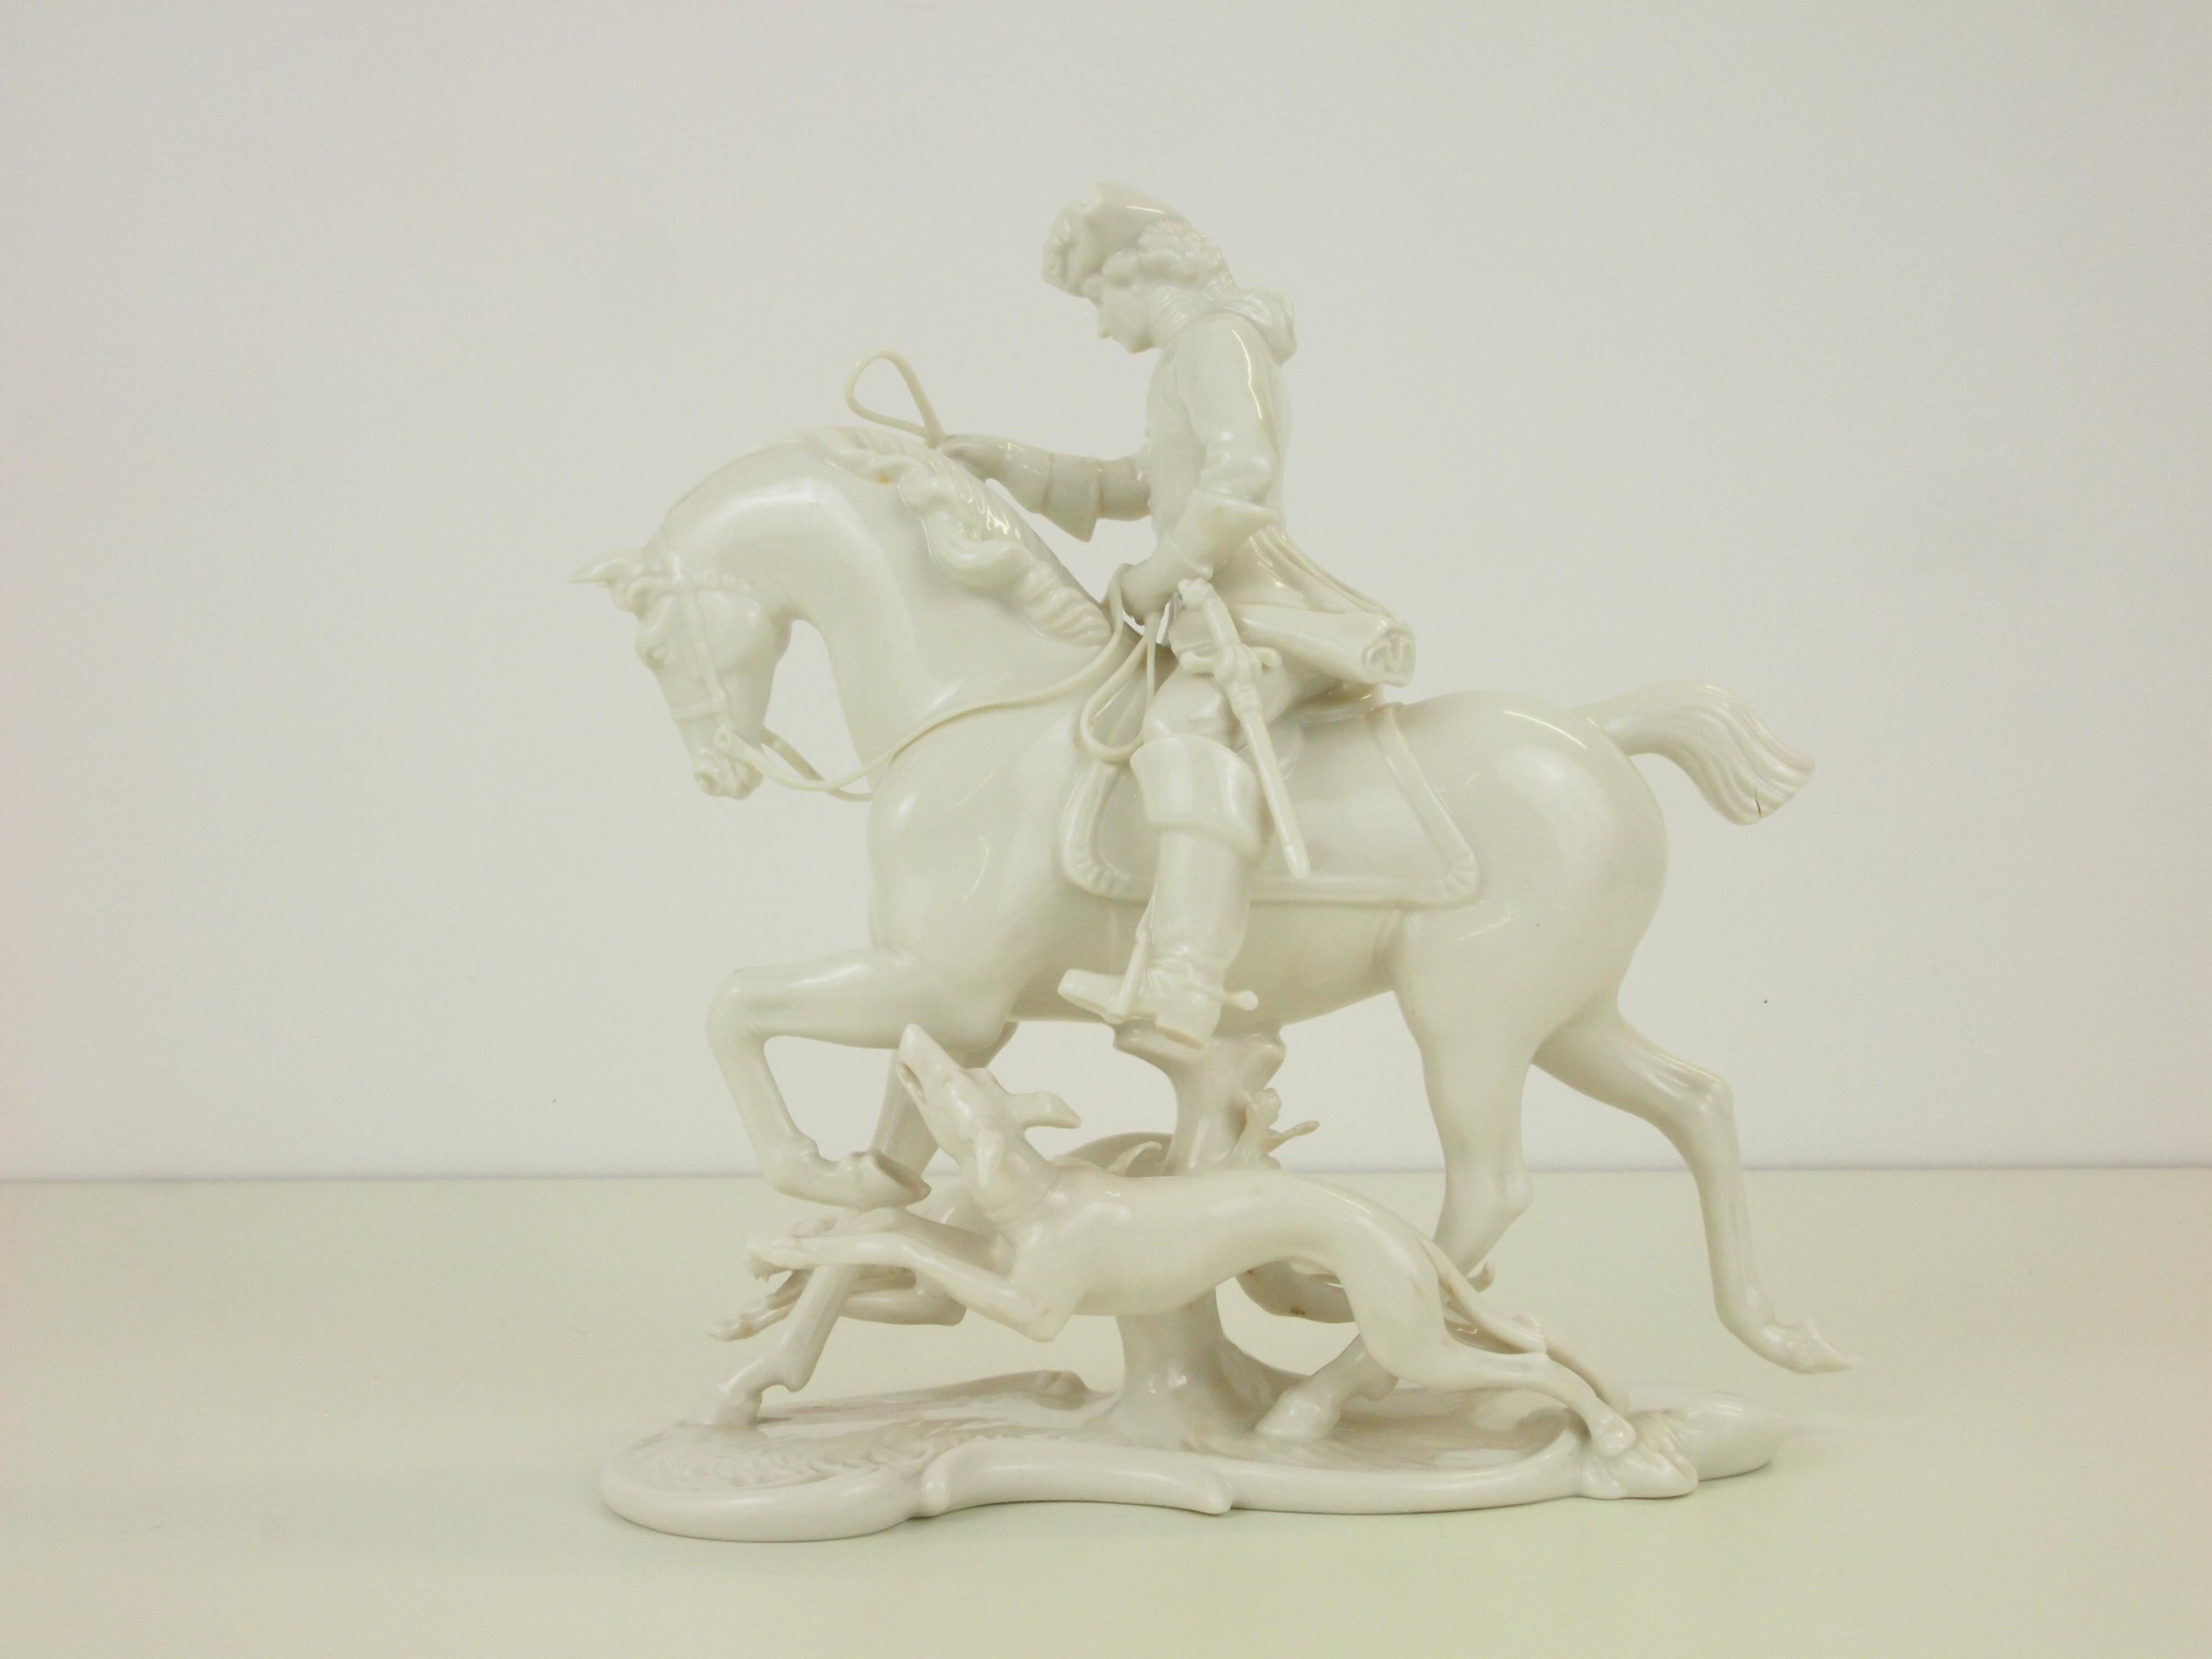 German Nymphenburg Porcelain Figurine Depicting a Horse Rider in a Hunting Scene For Sale